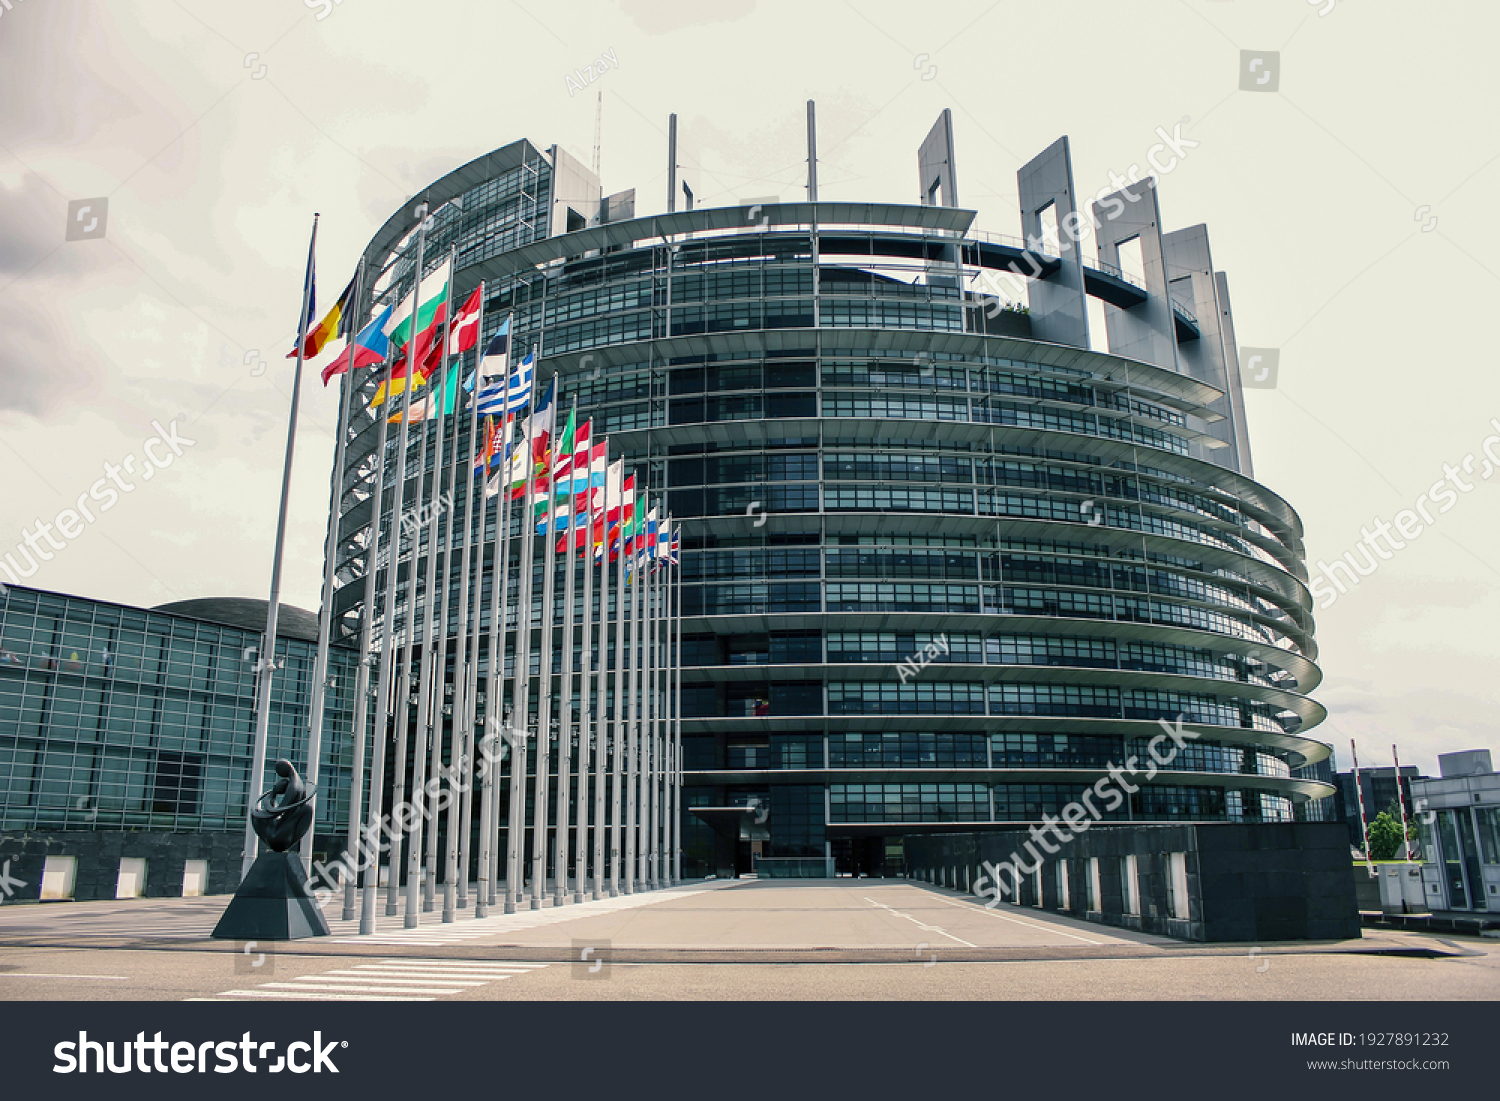 The European Parliament building, in Strasbourg, France #1927891232